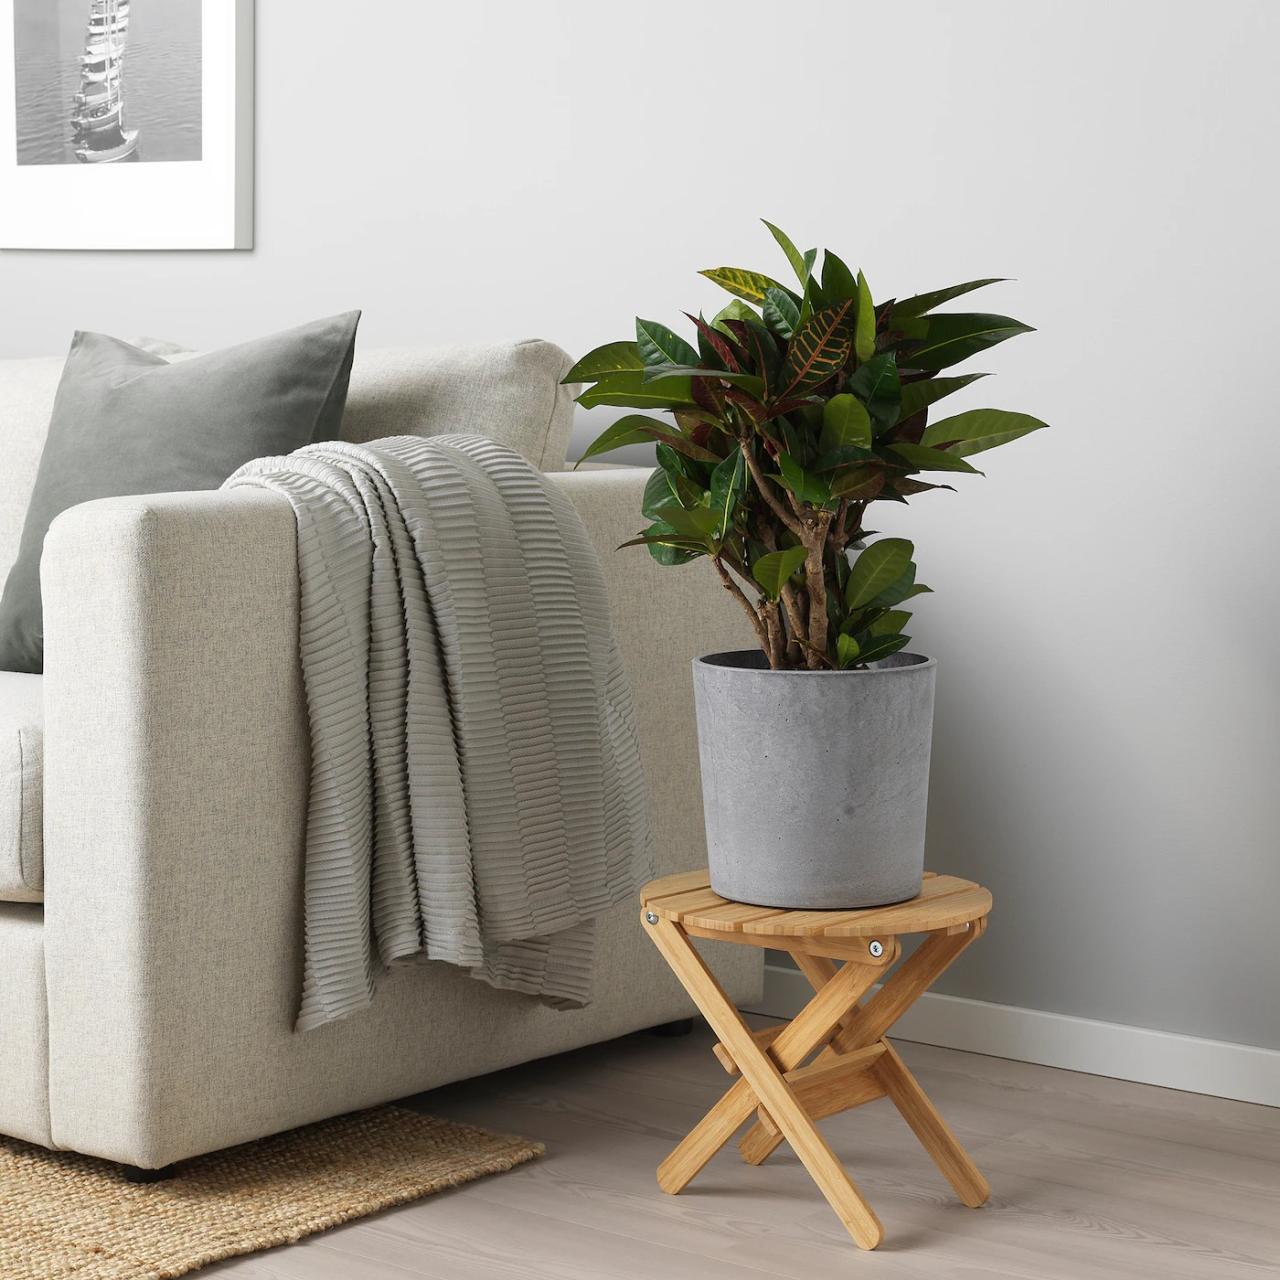 Hanging Plants Indoor | Wall Planters Indoor Ikea: Elevate Your Home Decor with Style and Functionality